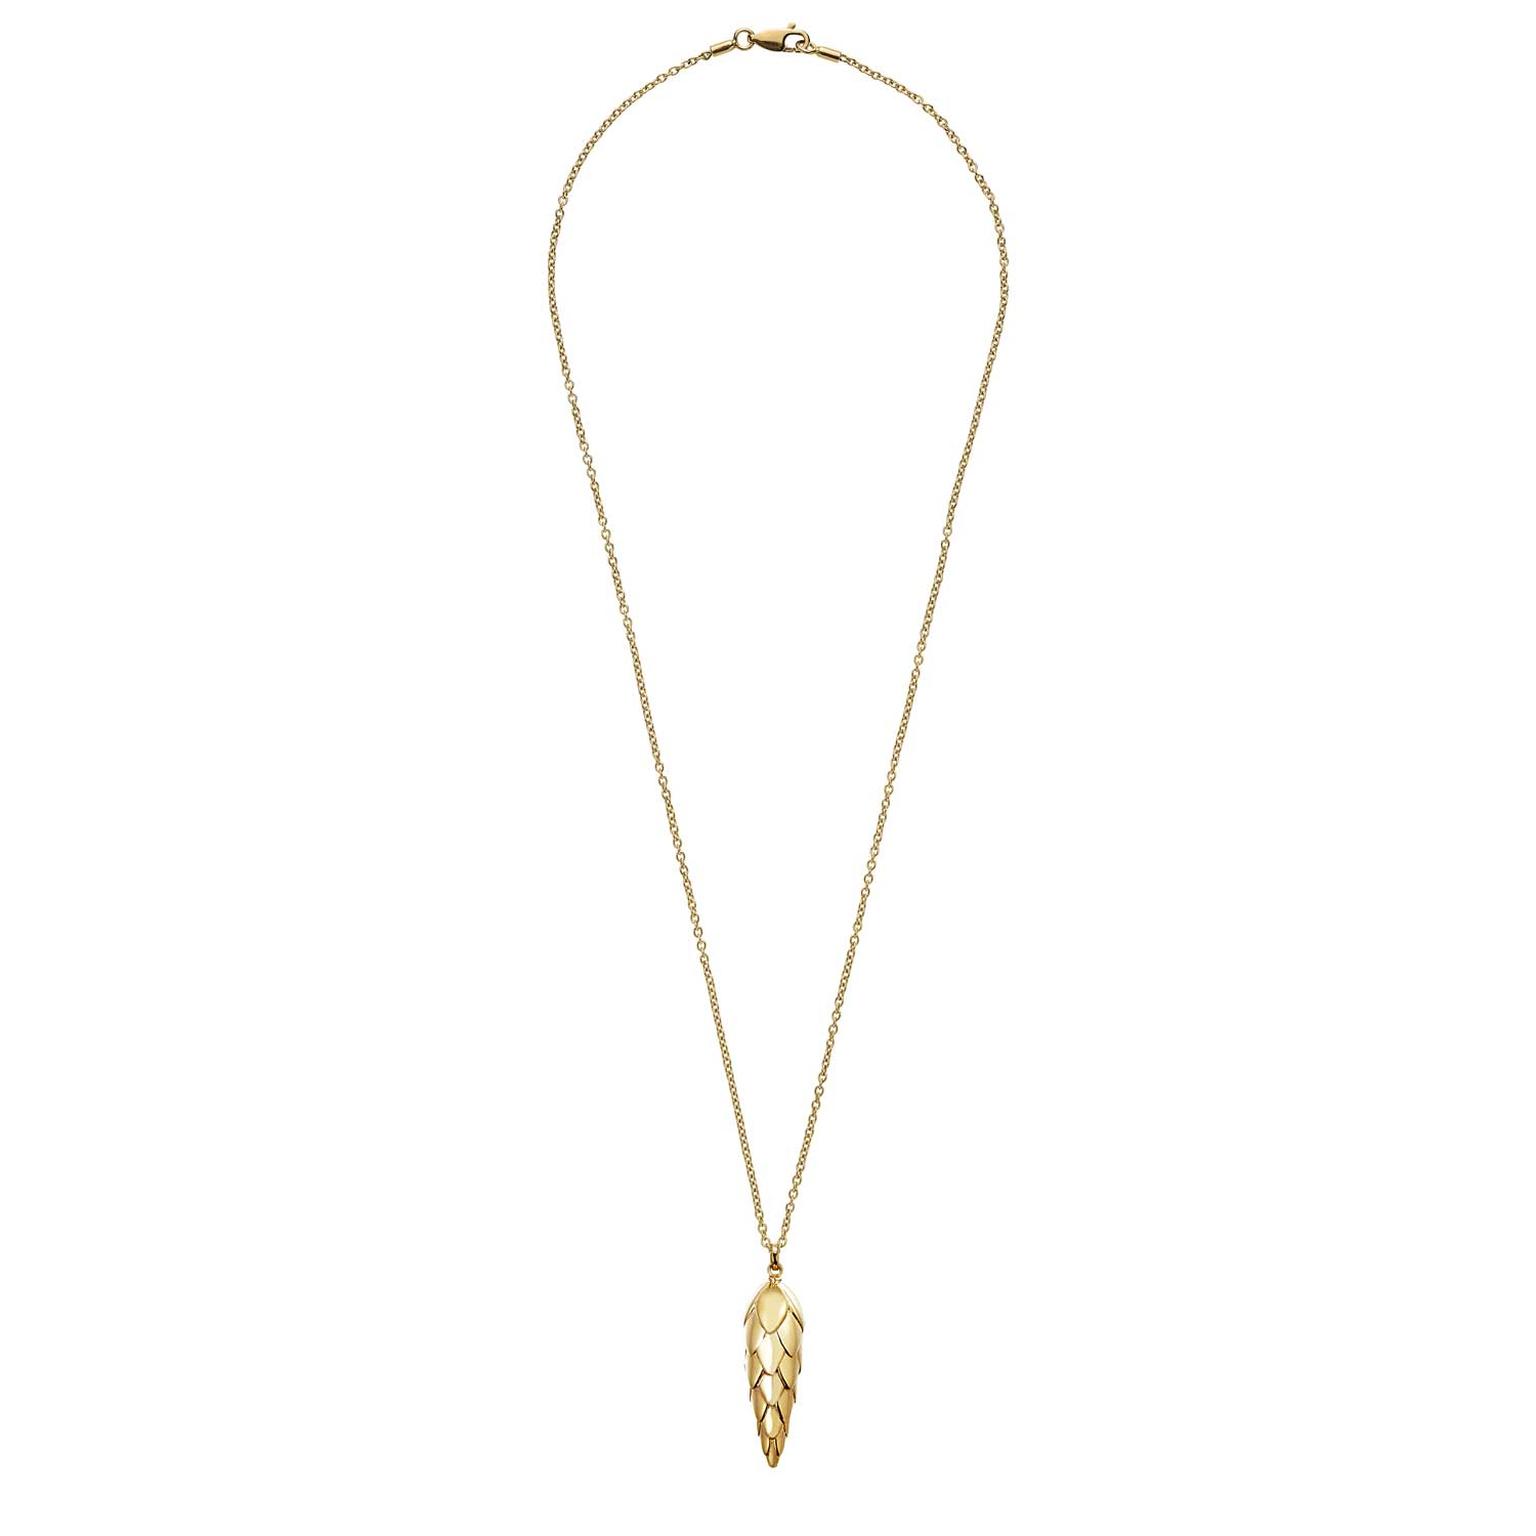 Patrick Mavros Pangolin Scale large pendant necklace in gold